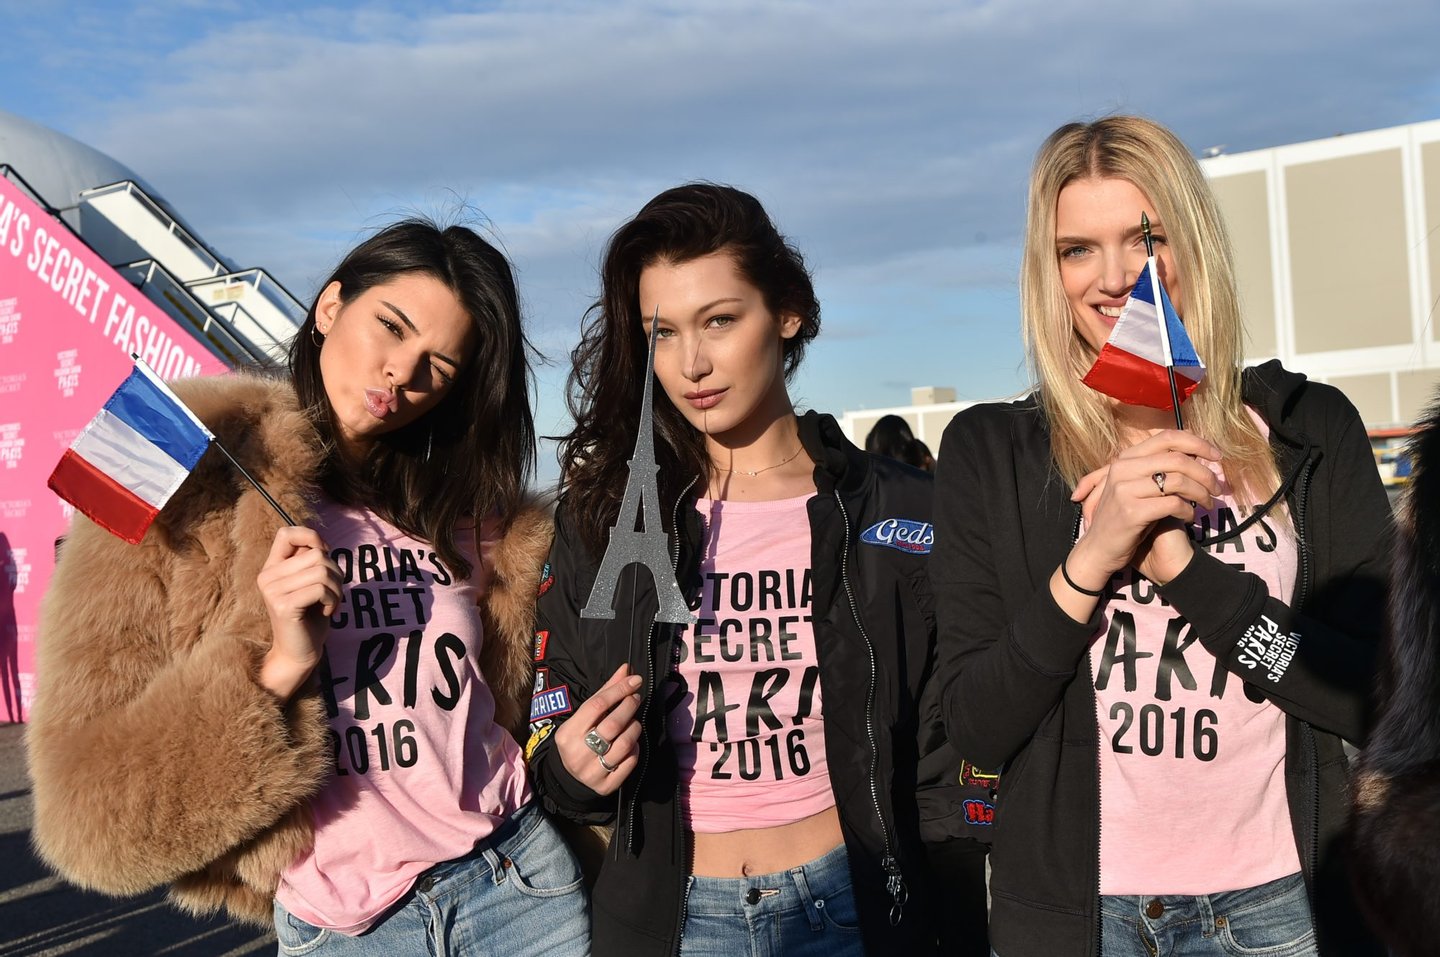 NEW YORK, NY - NOVEMBER 27: (L-R) Victoria's Secret models Kendall Jenner, Bella Hadid and Lily Donaldson depart for Paris for the 2016 Victoria's Secret Fashion Show on November 27, 2016 in New York City. (Photo by Mike Coppola/Getty Images for Victoria's Secret)